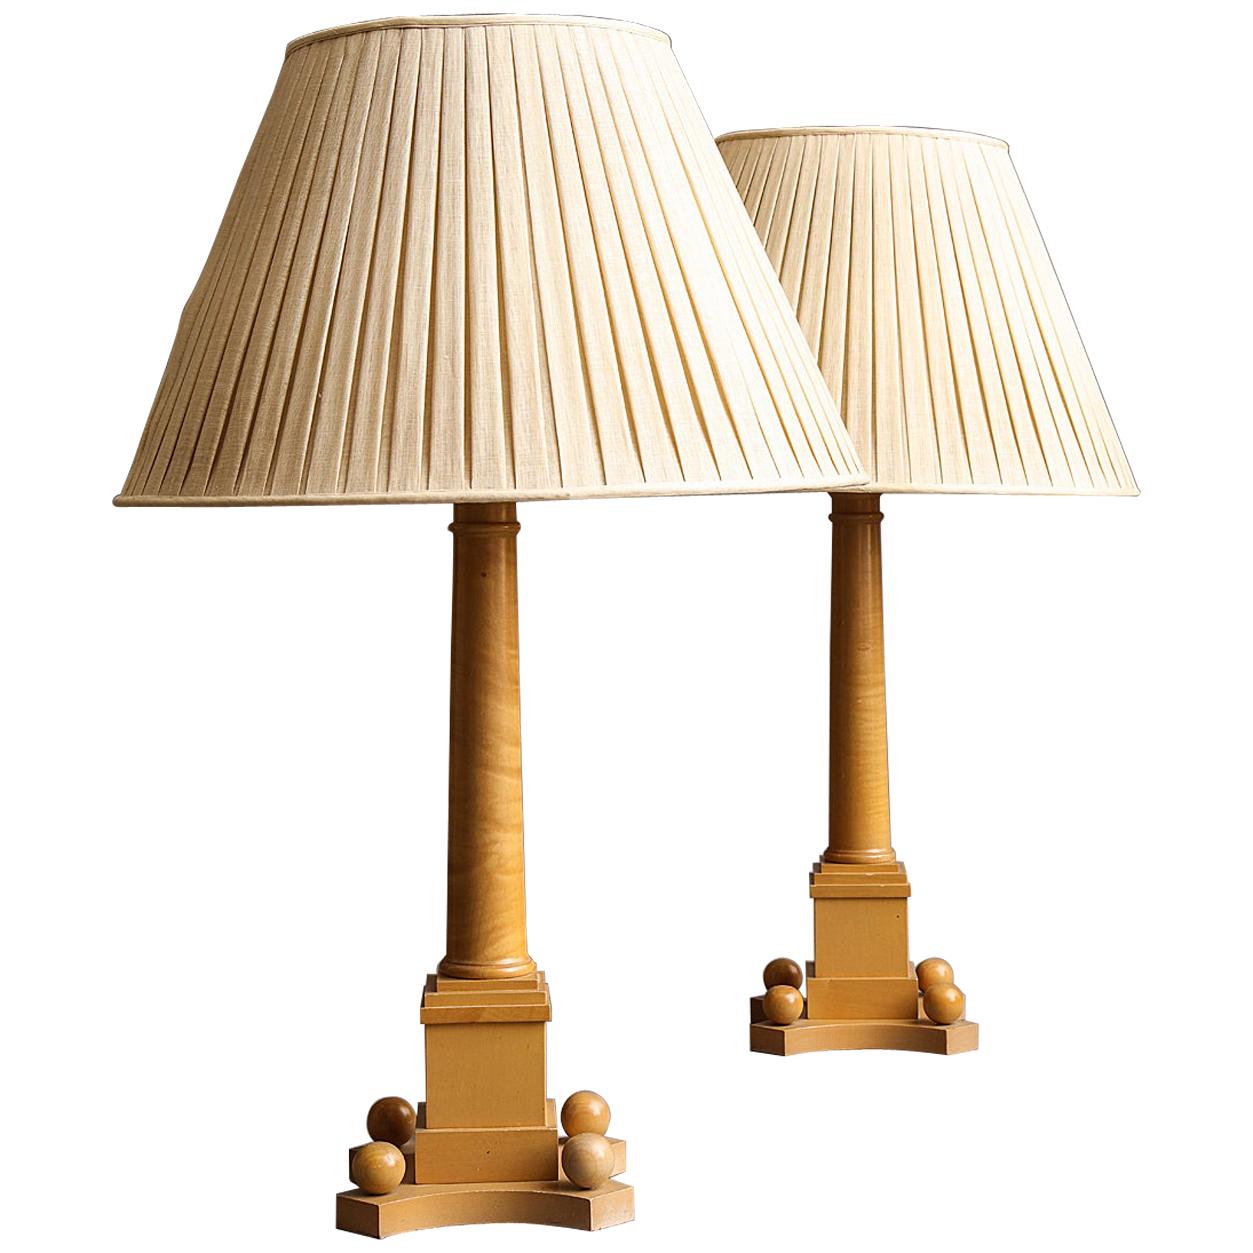 David Hicks Pair of Sycamore Table Lamps